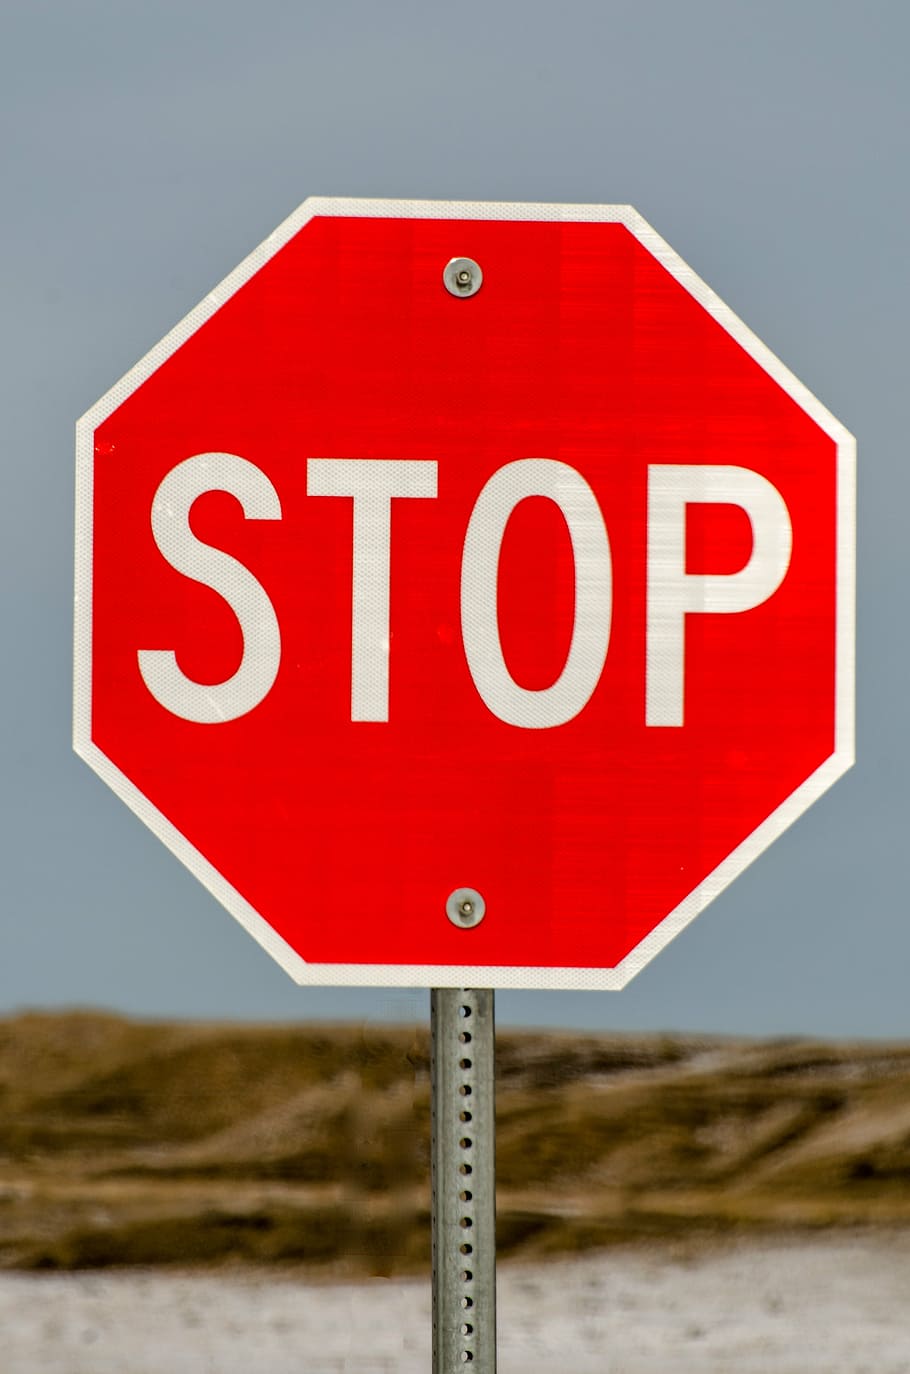 stop sign, red, traffic, road, warning, symbol, street, safety